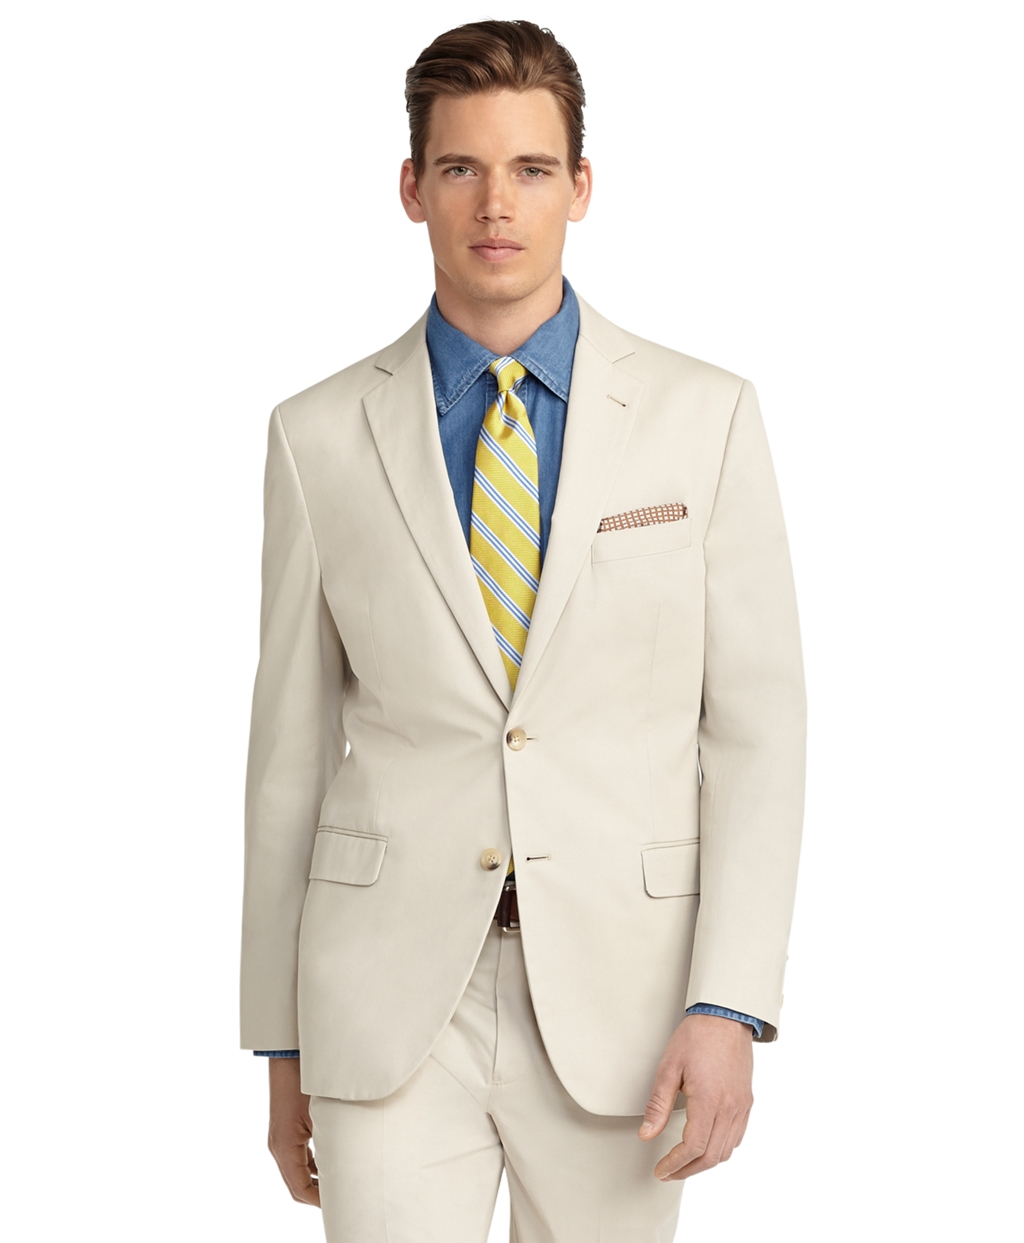 Lyst - Brooks Brothers Italian Cotton Fitzgerald Suit in Natural for Men